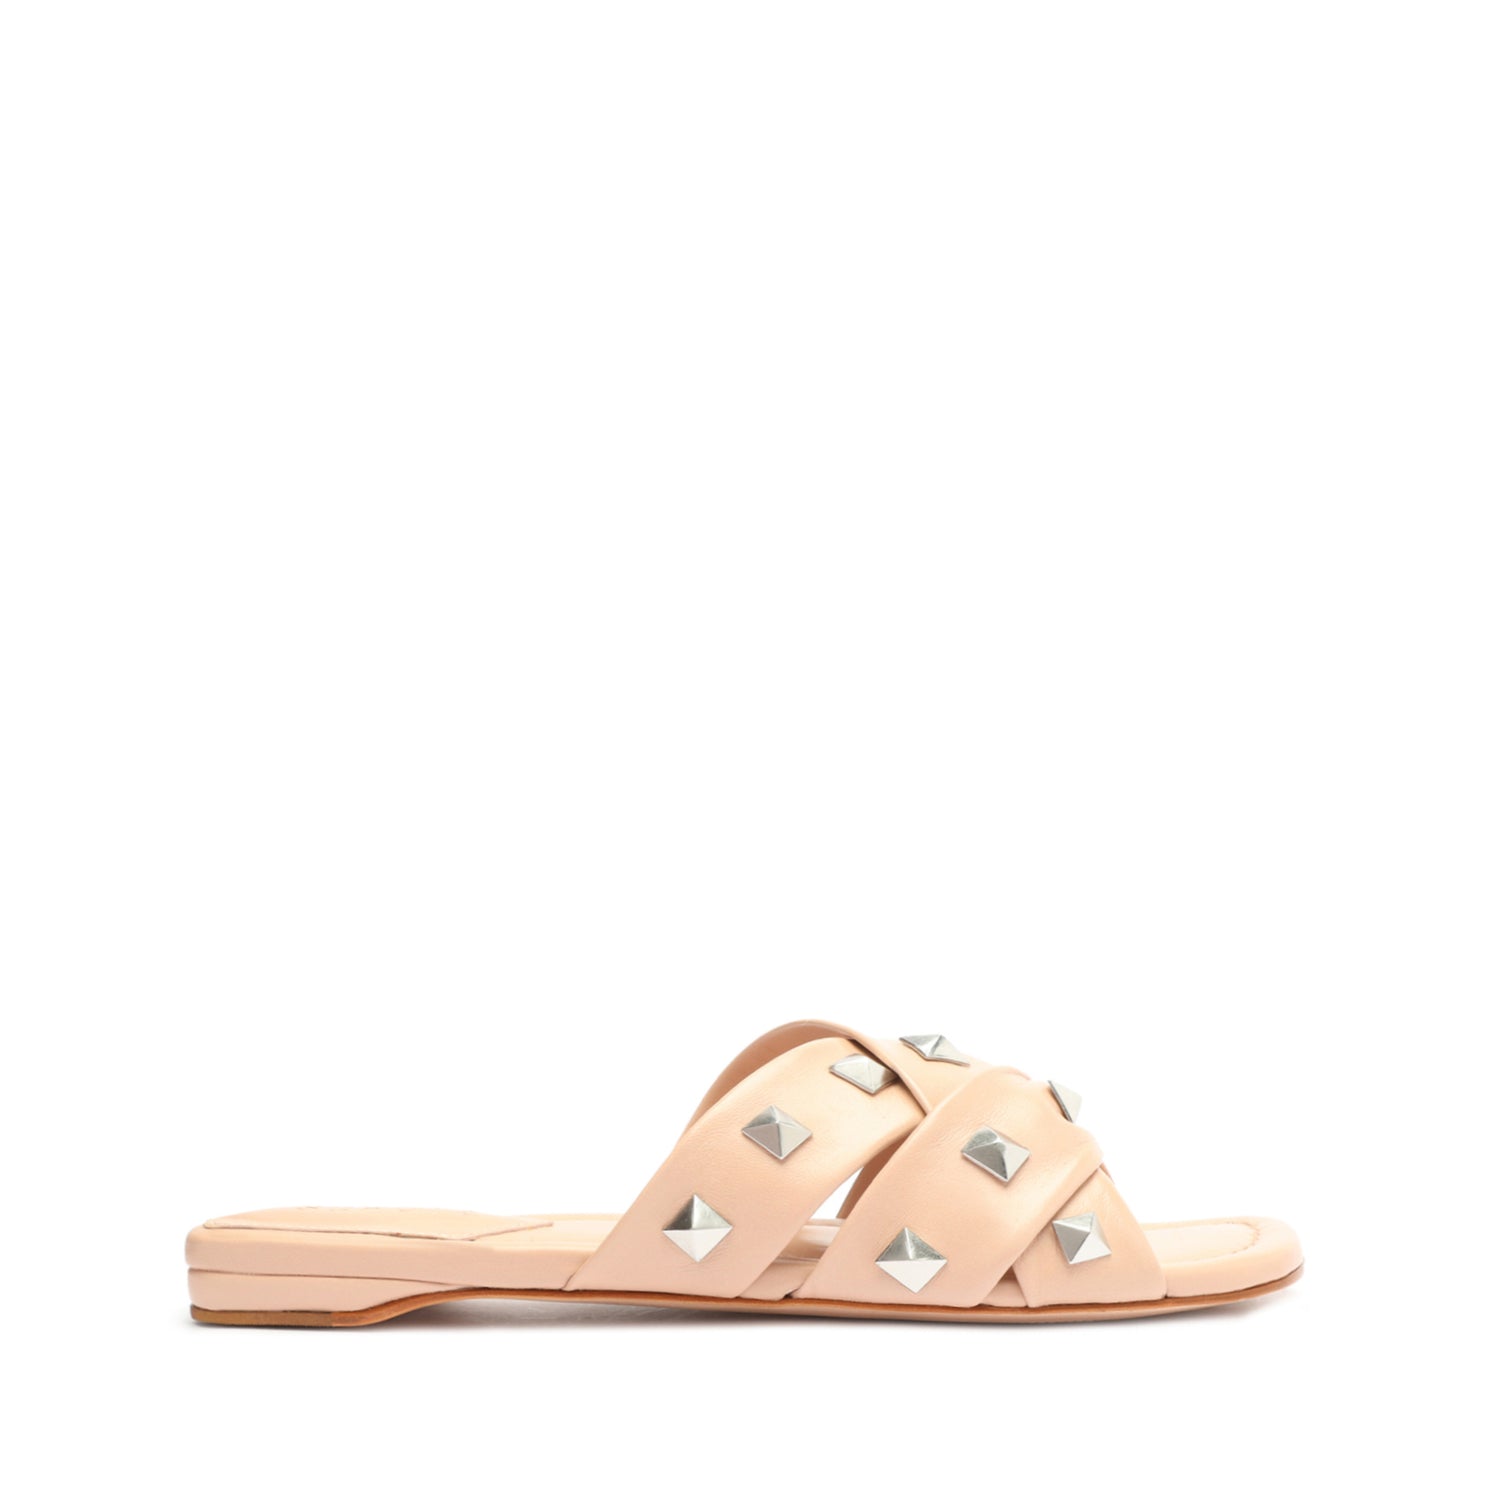 Roxanne Nappa Leather Sandal Flats High Summer 23 5 Sweet Rose Nappa Leather - Schutz Shoes